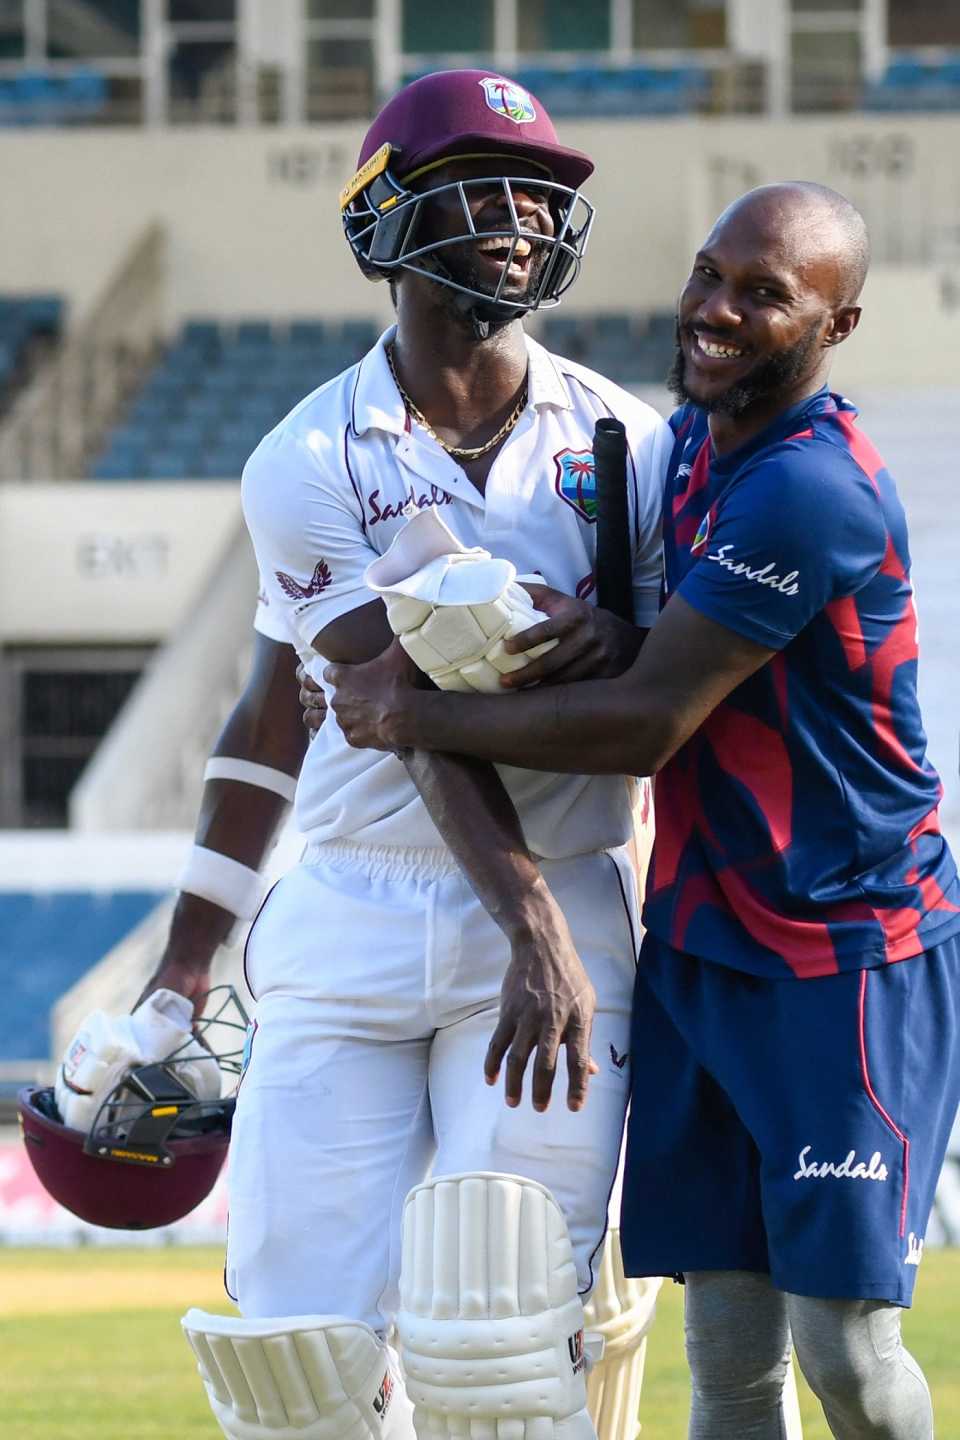 Kemar Roach and Jermaine Blackwood, heroes of West Indies' triumph, enjoy the winning moment